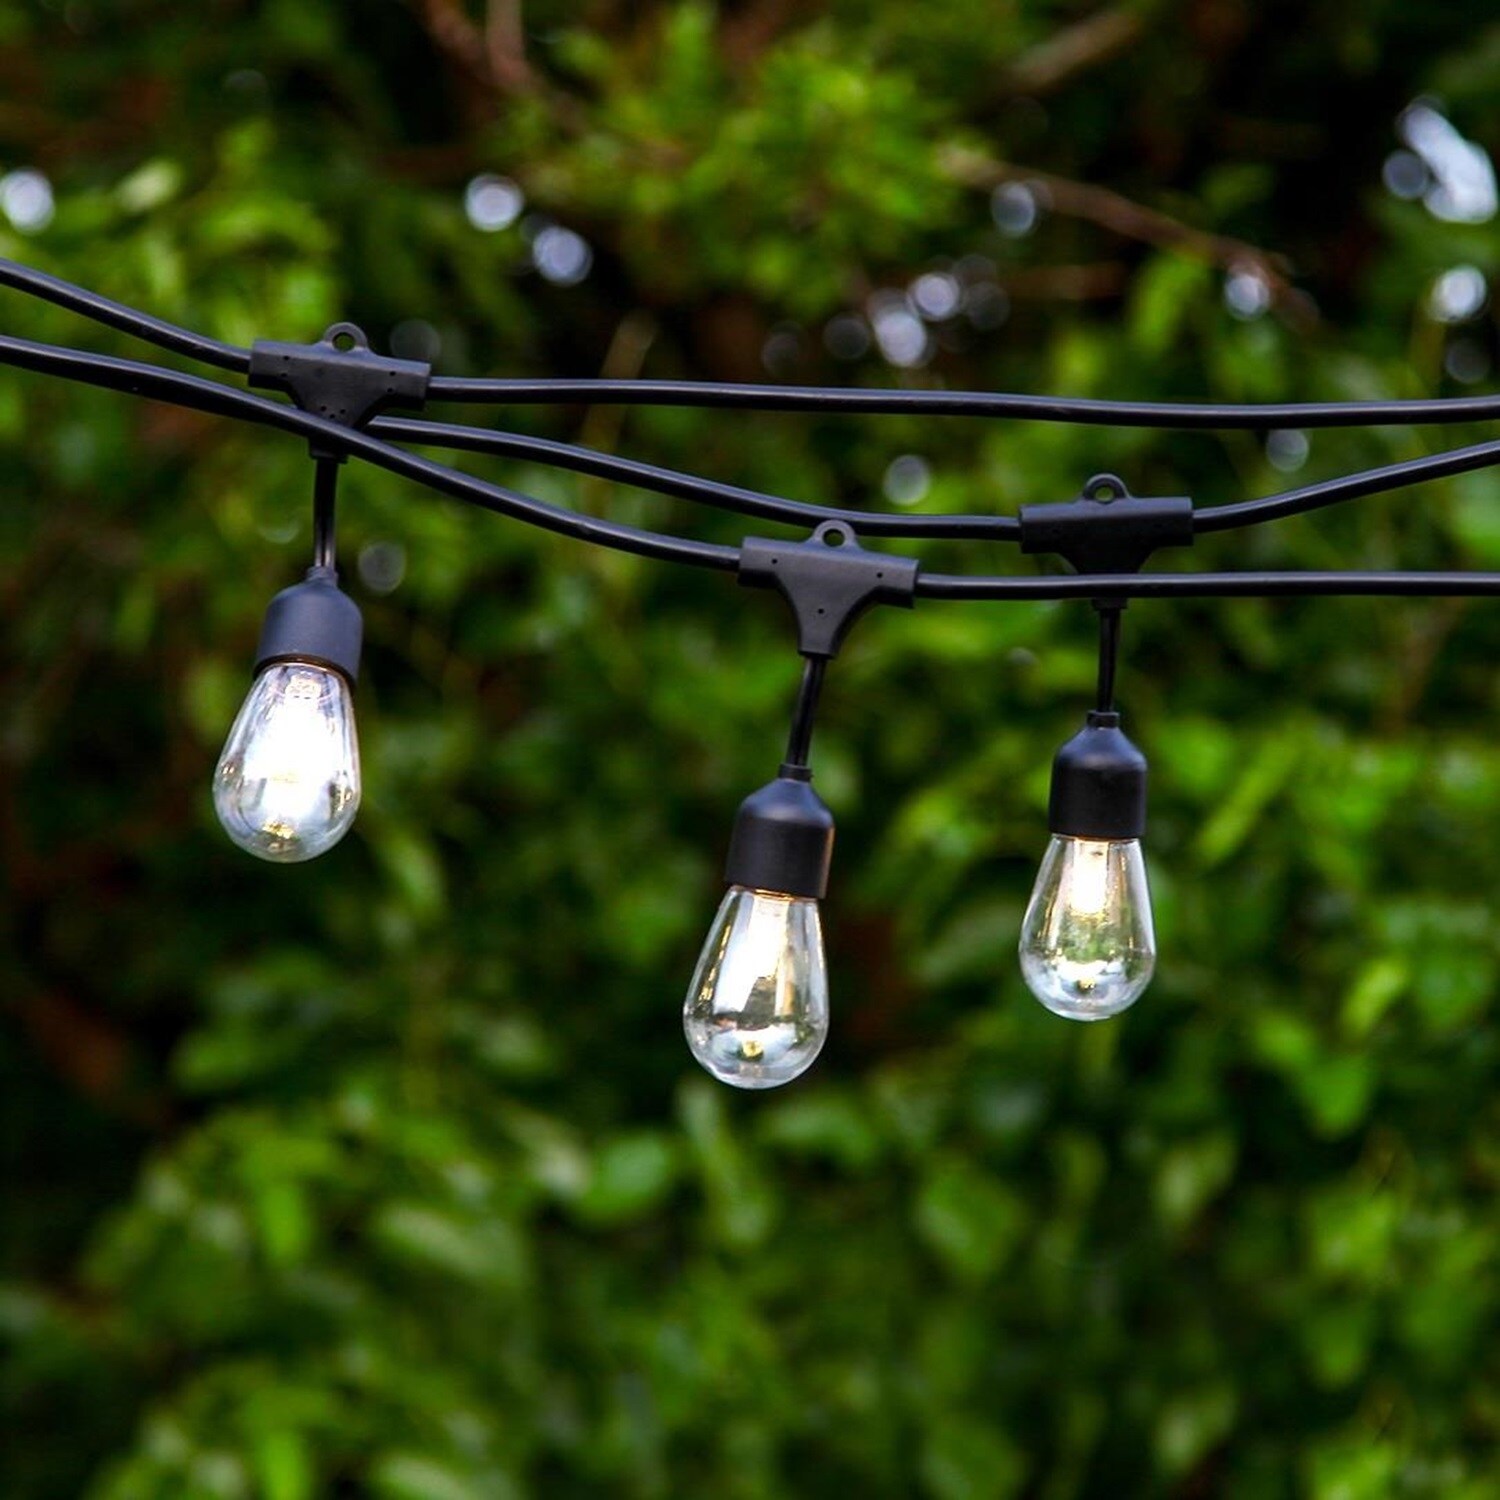 Outdoor 20 ft. Plug-in Electric Edison Bulb Cafe String Lights with 10  Brown Metal Shades